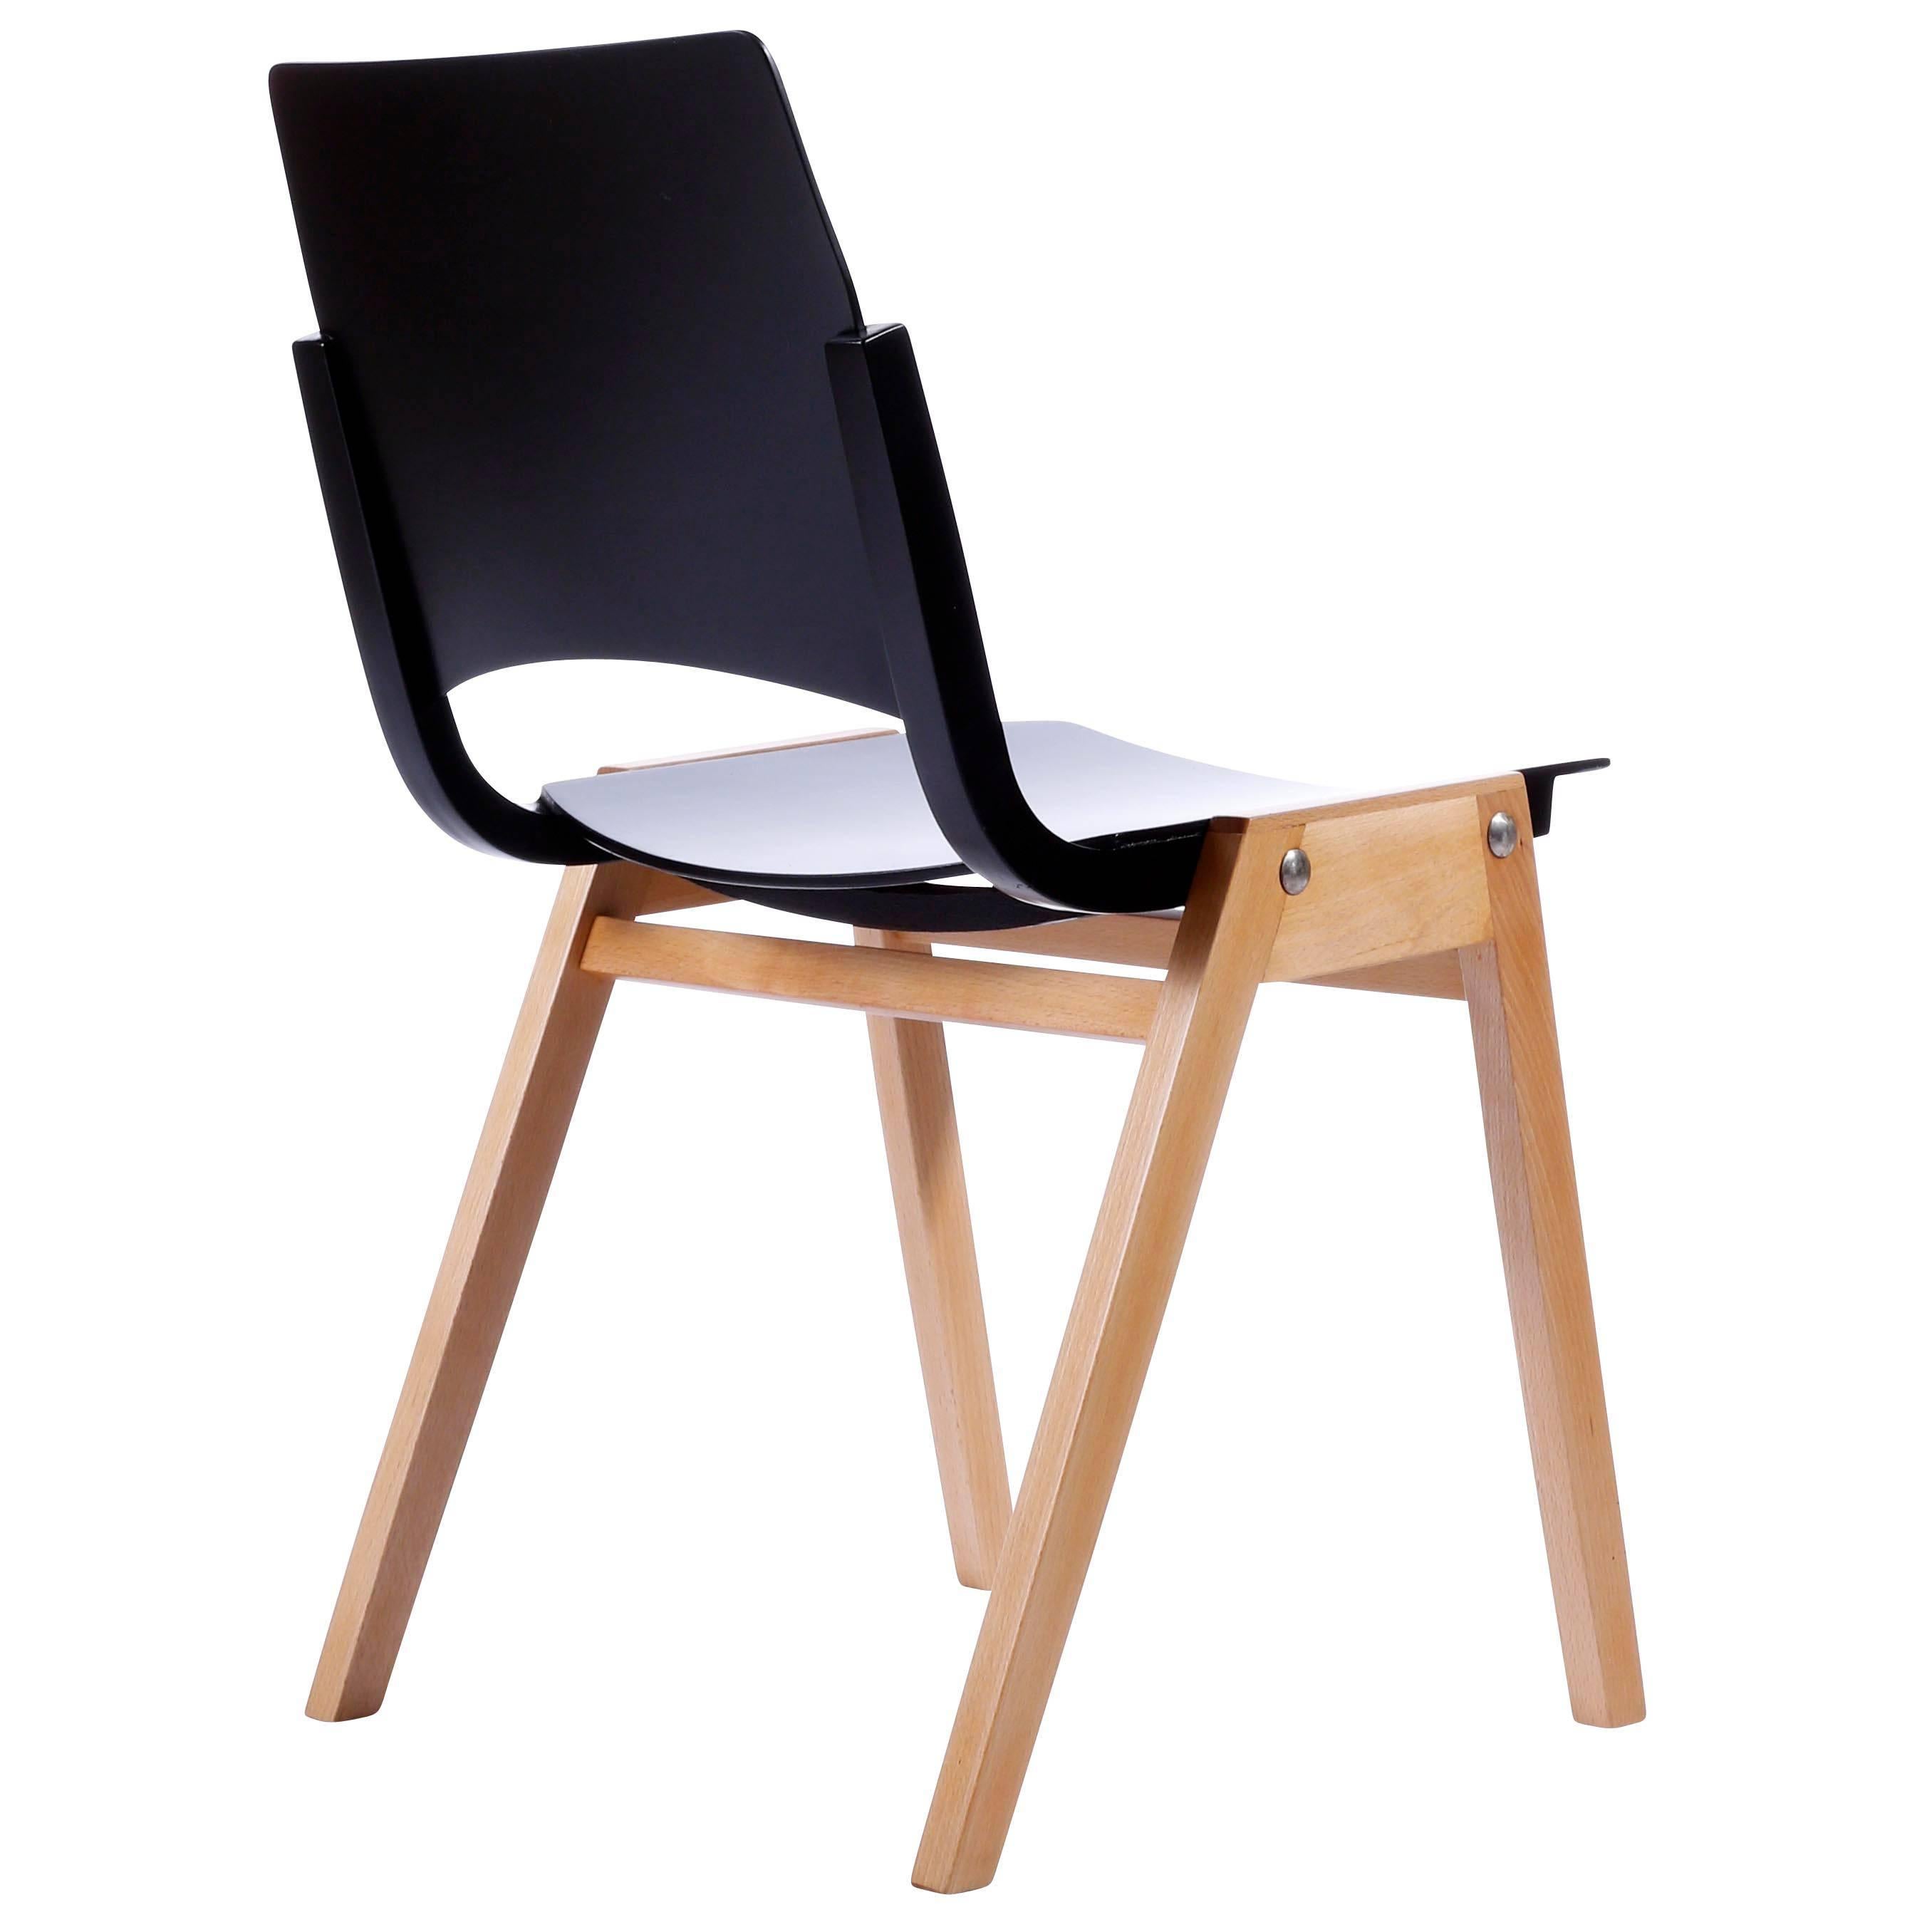 Mid-20th Century Roland Rainer Stacking Chair P7, Bicolored Beech, Austria, 1952